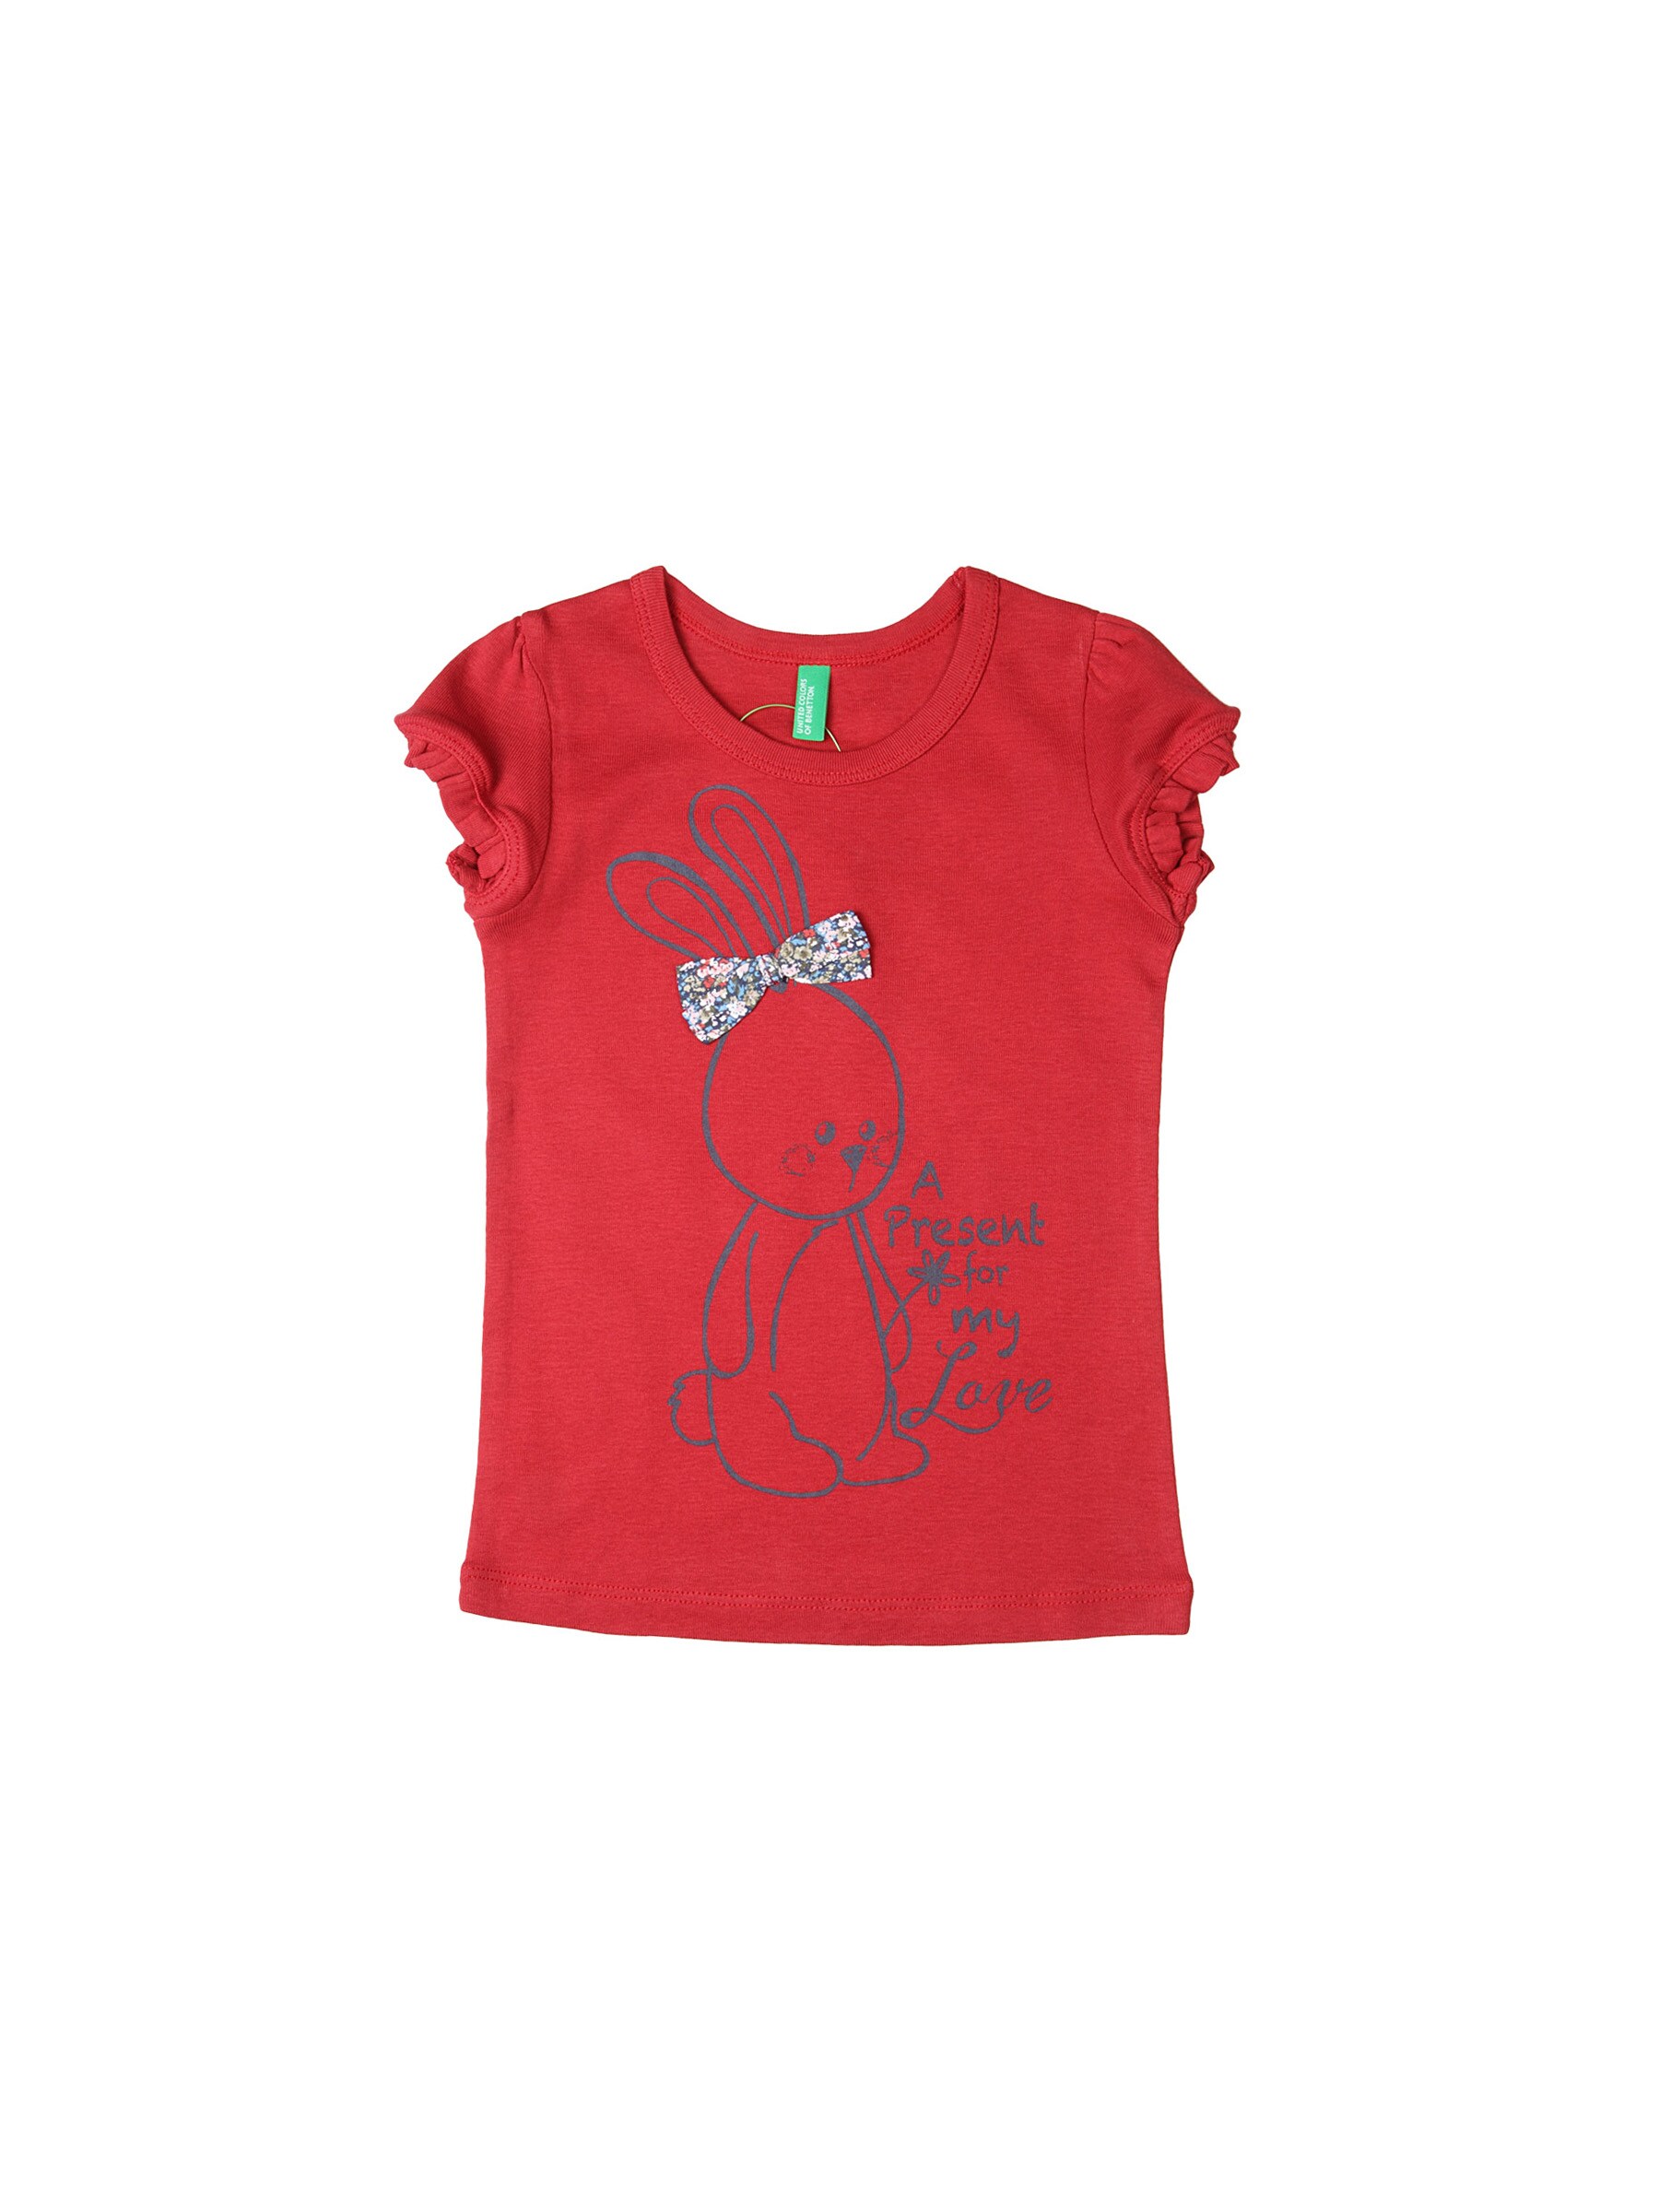 United Colors of Benetton Kids Girls Red Printed Top